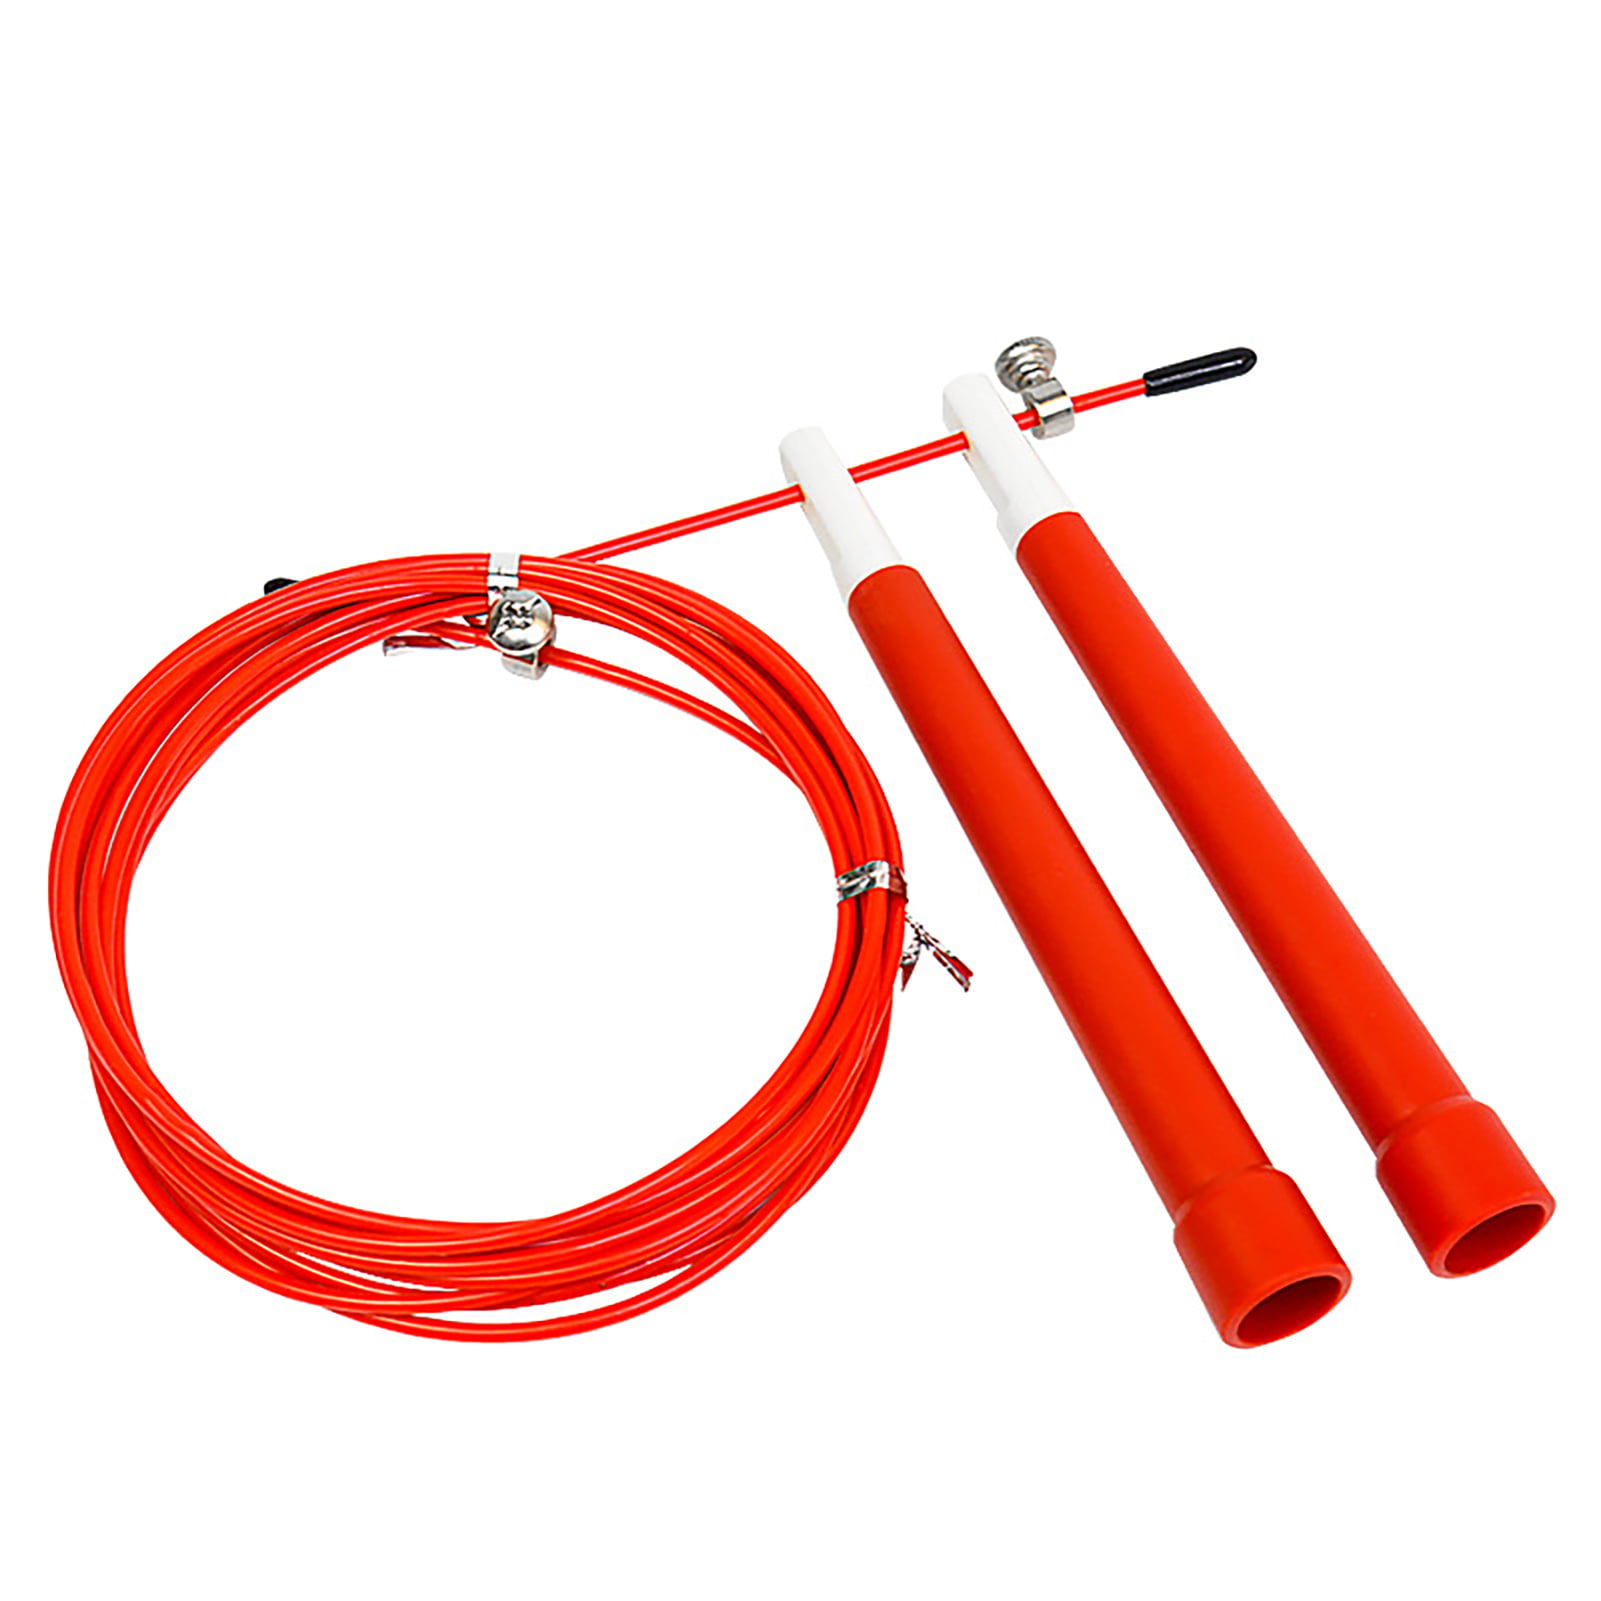 Details about   Gym Training Jump Rope Adjustable Steel Skipping Rope Jumping Rope for Adult 